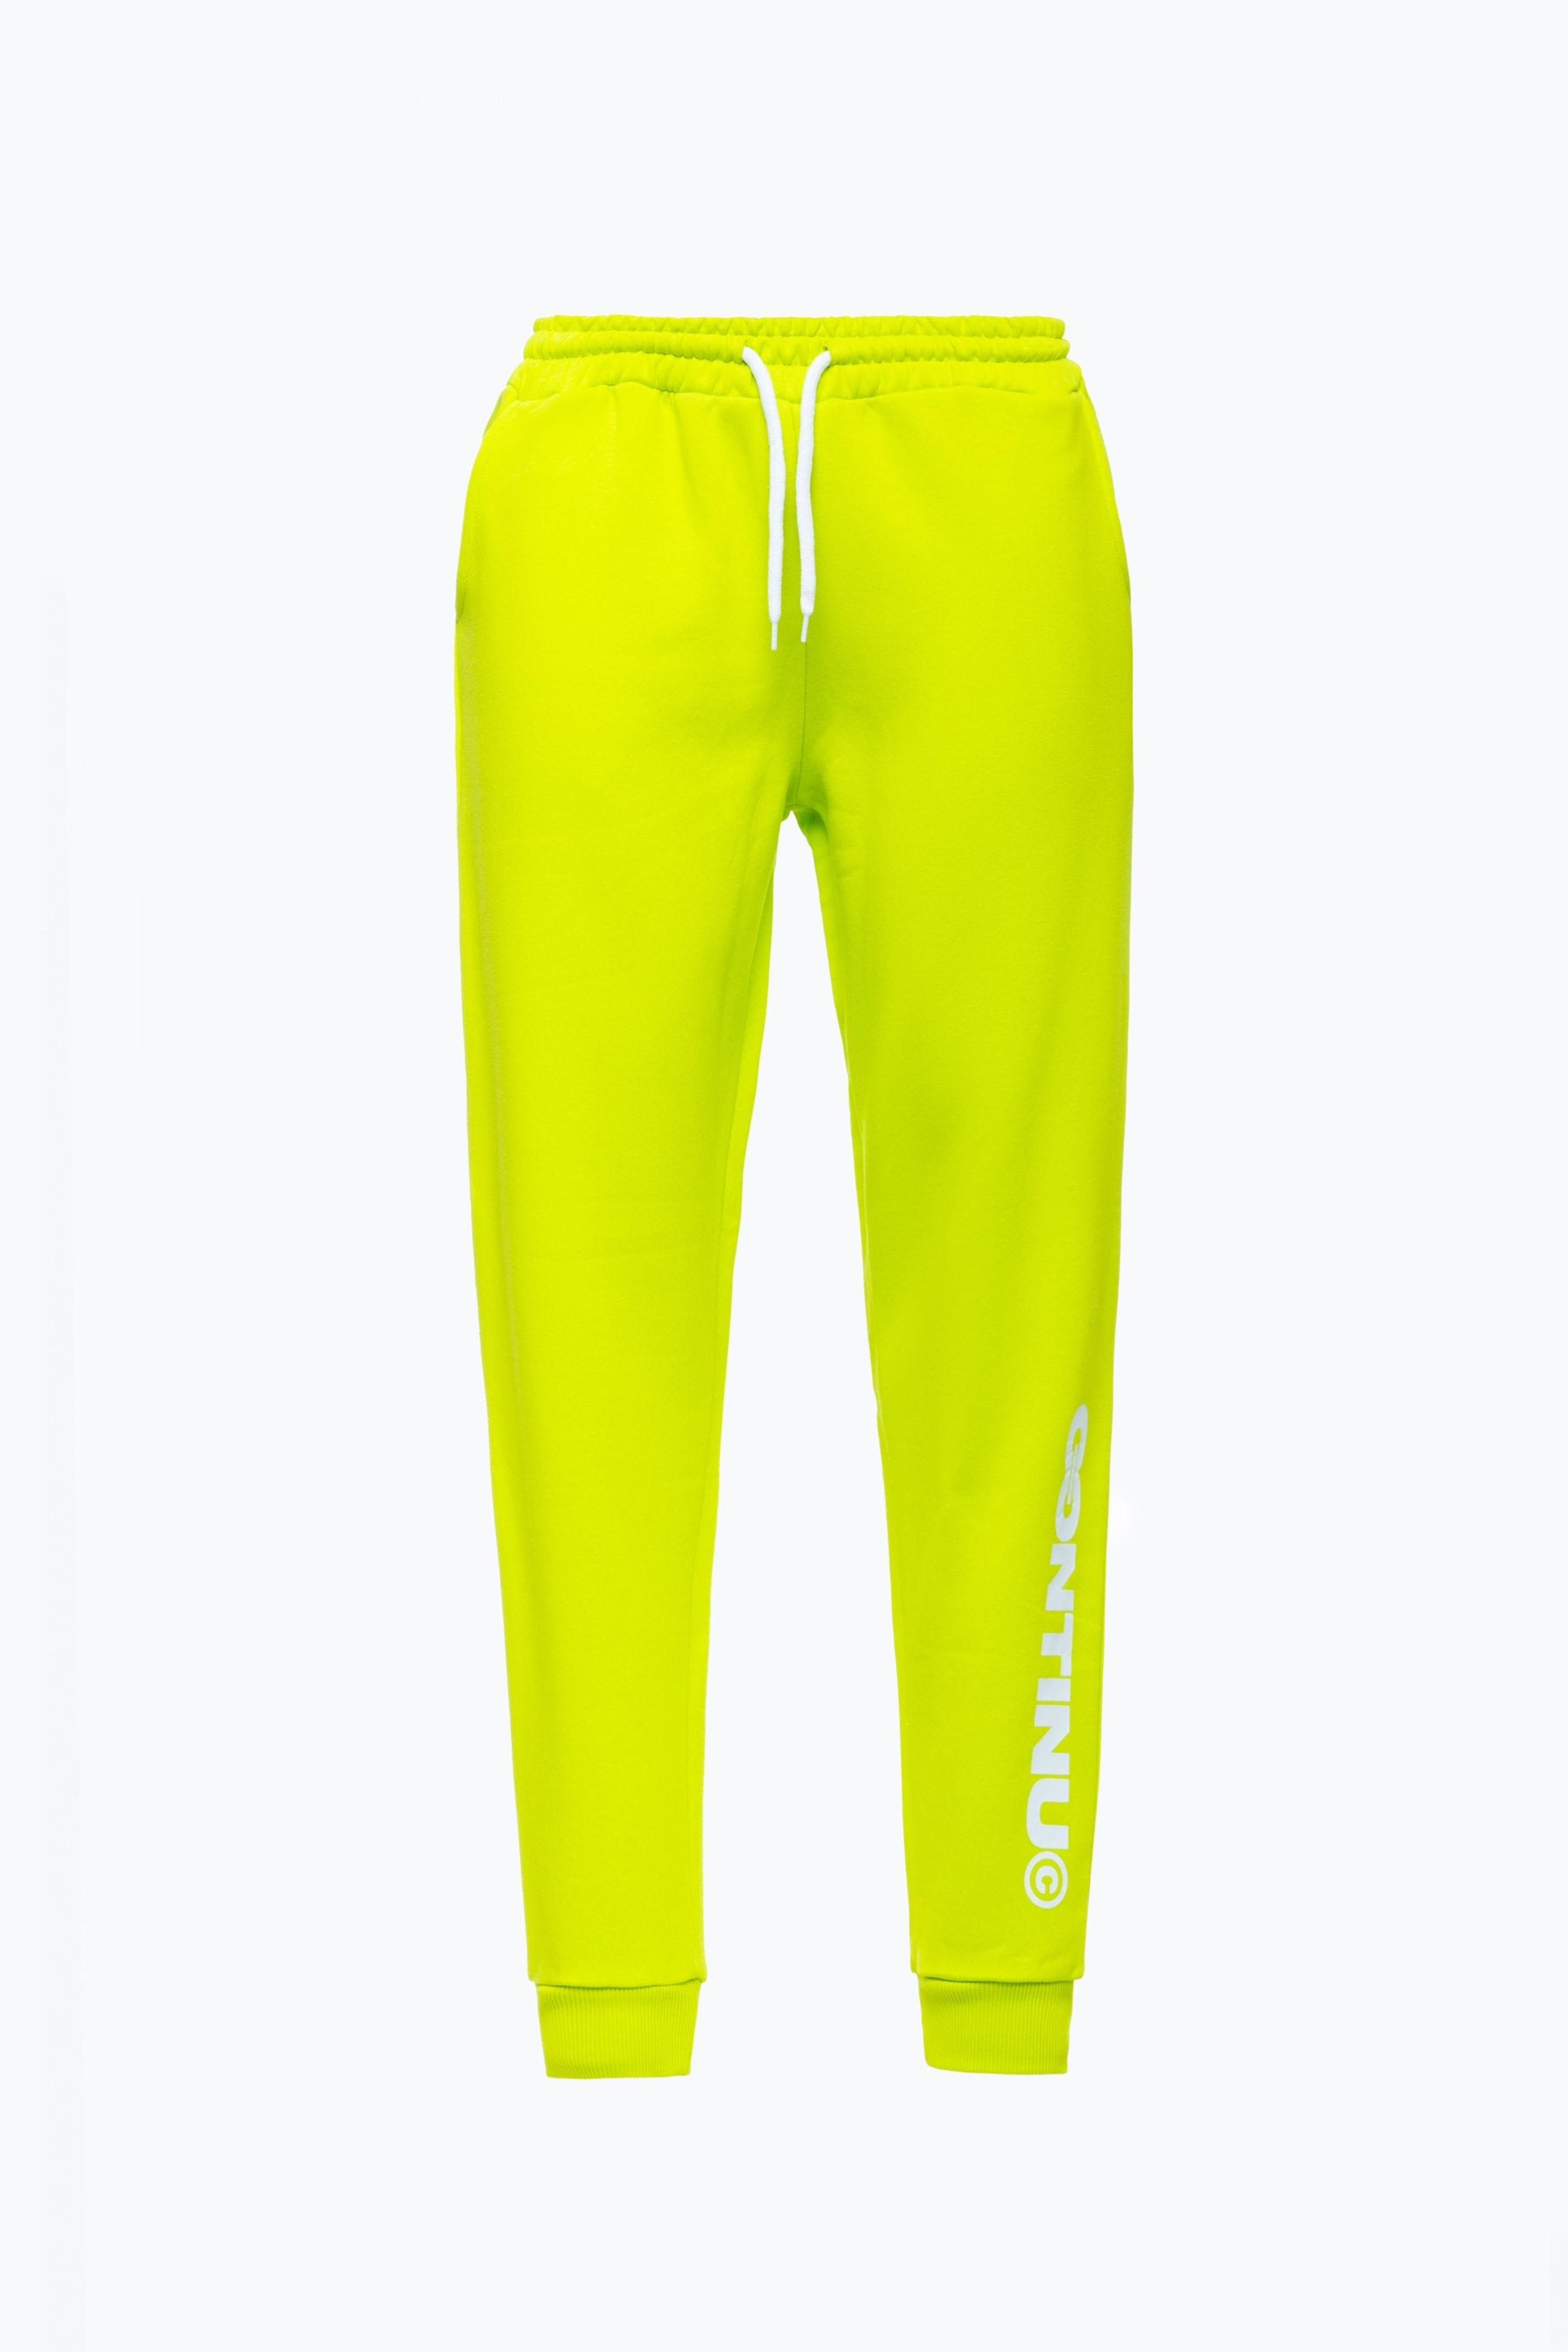 Alternate View 7 of CONTINU8 NEON GREEN JOGGERS